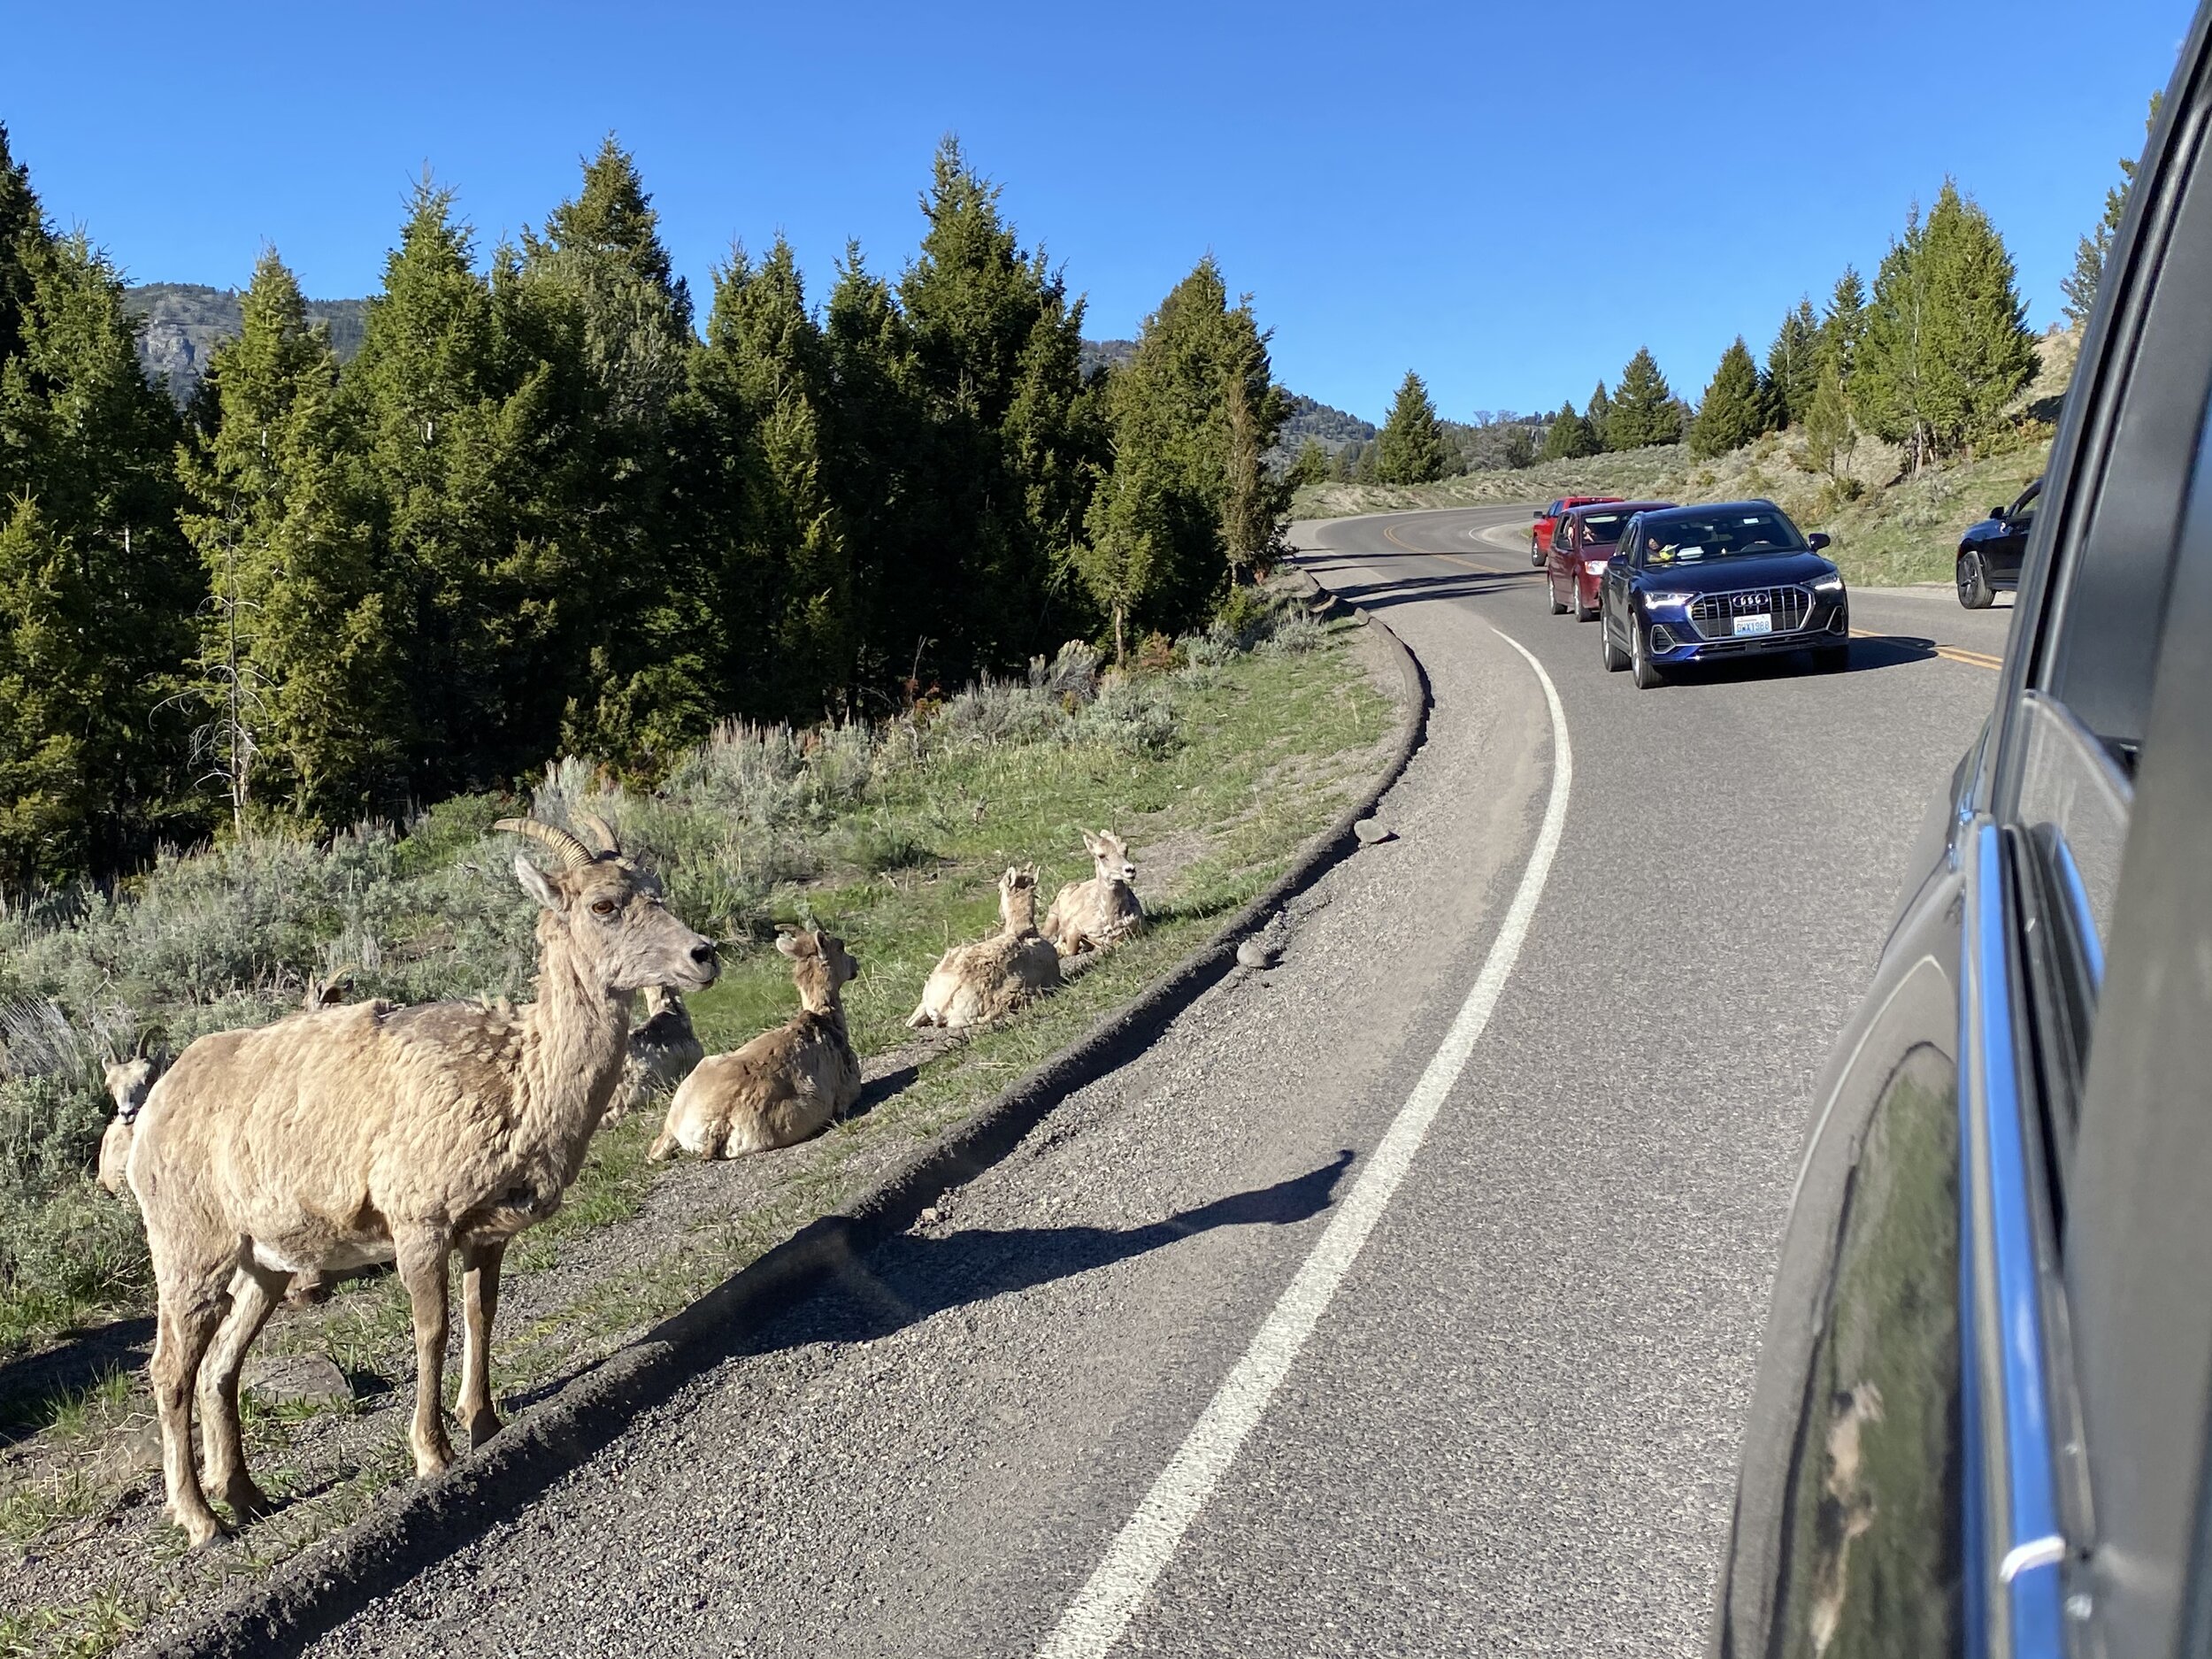 These female bighorn sheep were a great welcome to YNP!  Photo by Karen Boudreaux, May 29, 2021